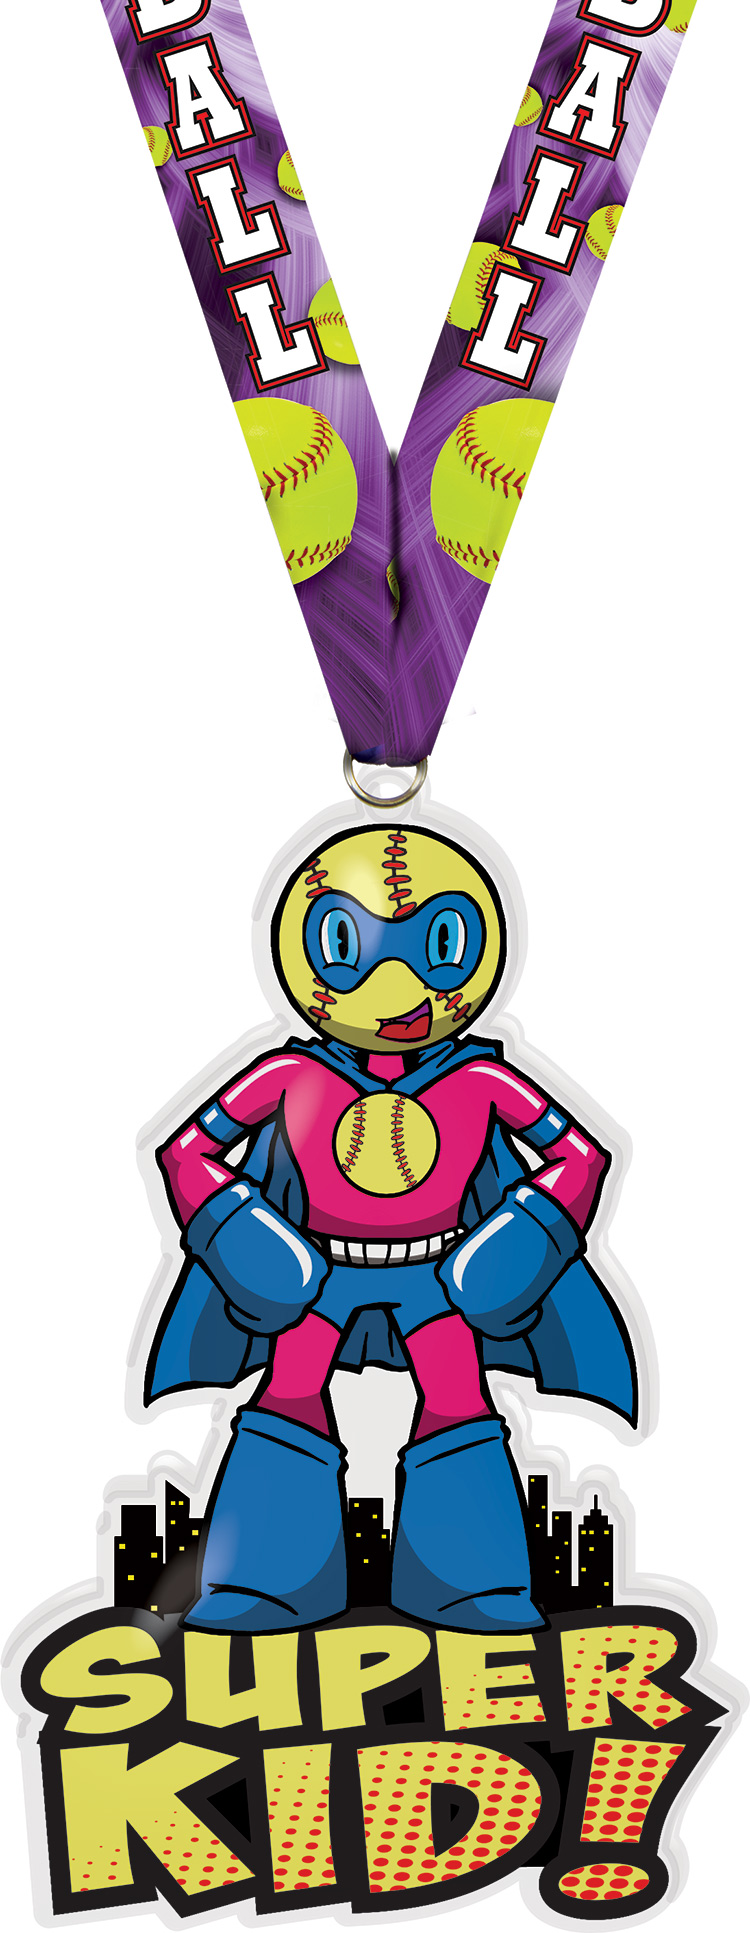 Exclusive Softball Super Kid Acrylic Medal- 4 inch